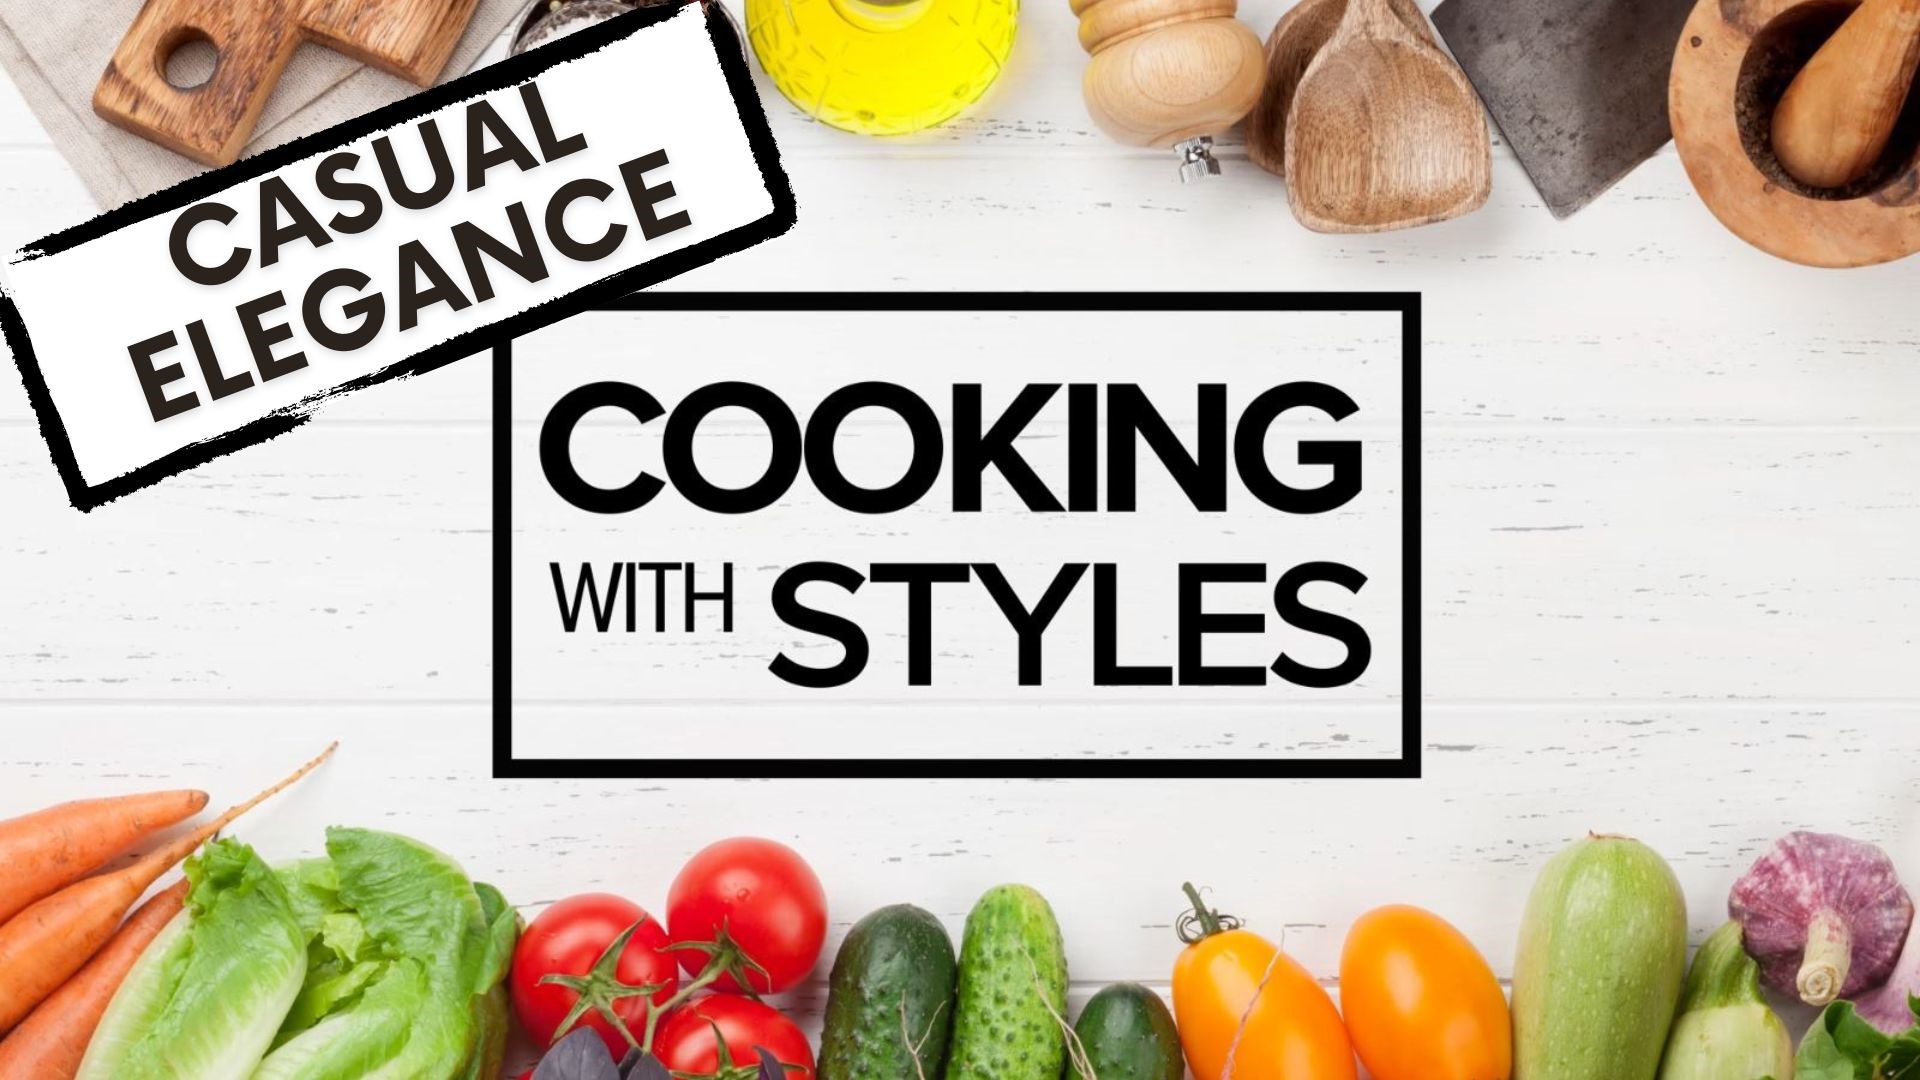 KFMB's Shawn Styles showcases meals that are easy and casual, yet look elegant. This includes how to make coq au vin, one pan Greek chicken, Swiss goulash and more.